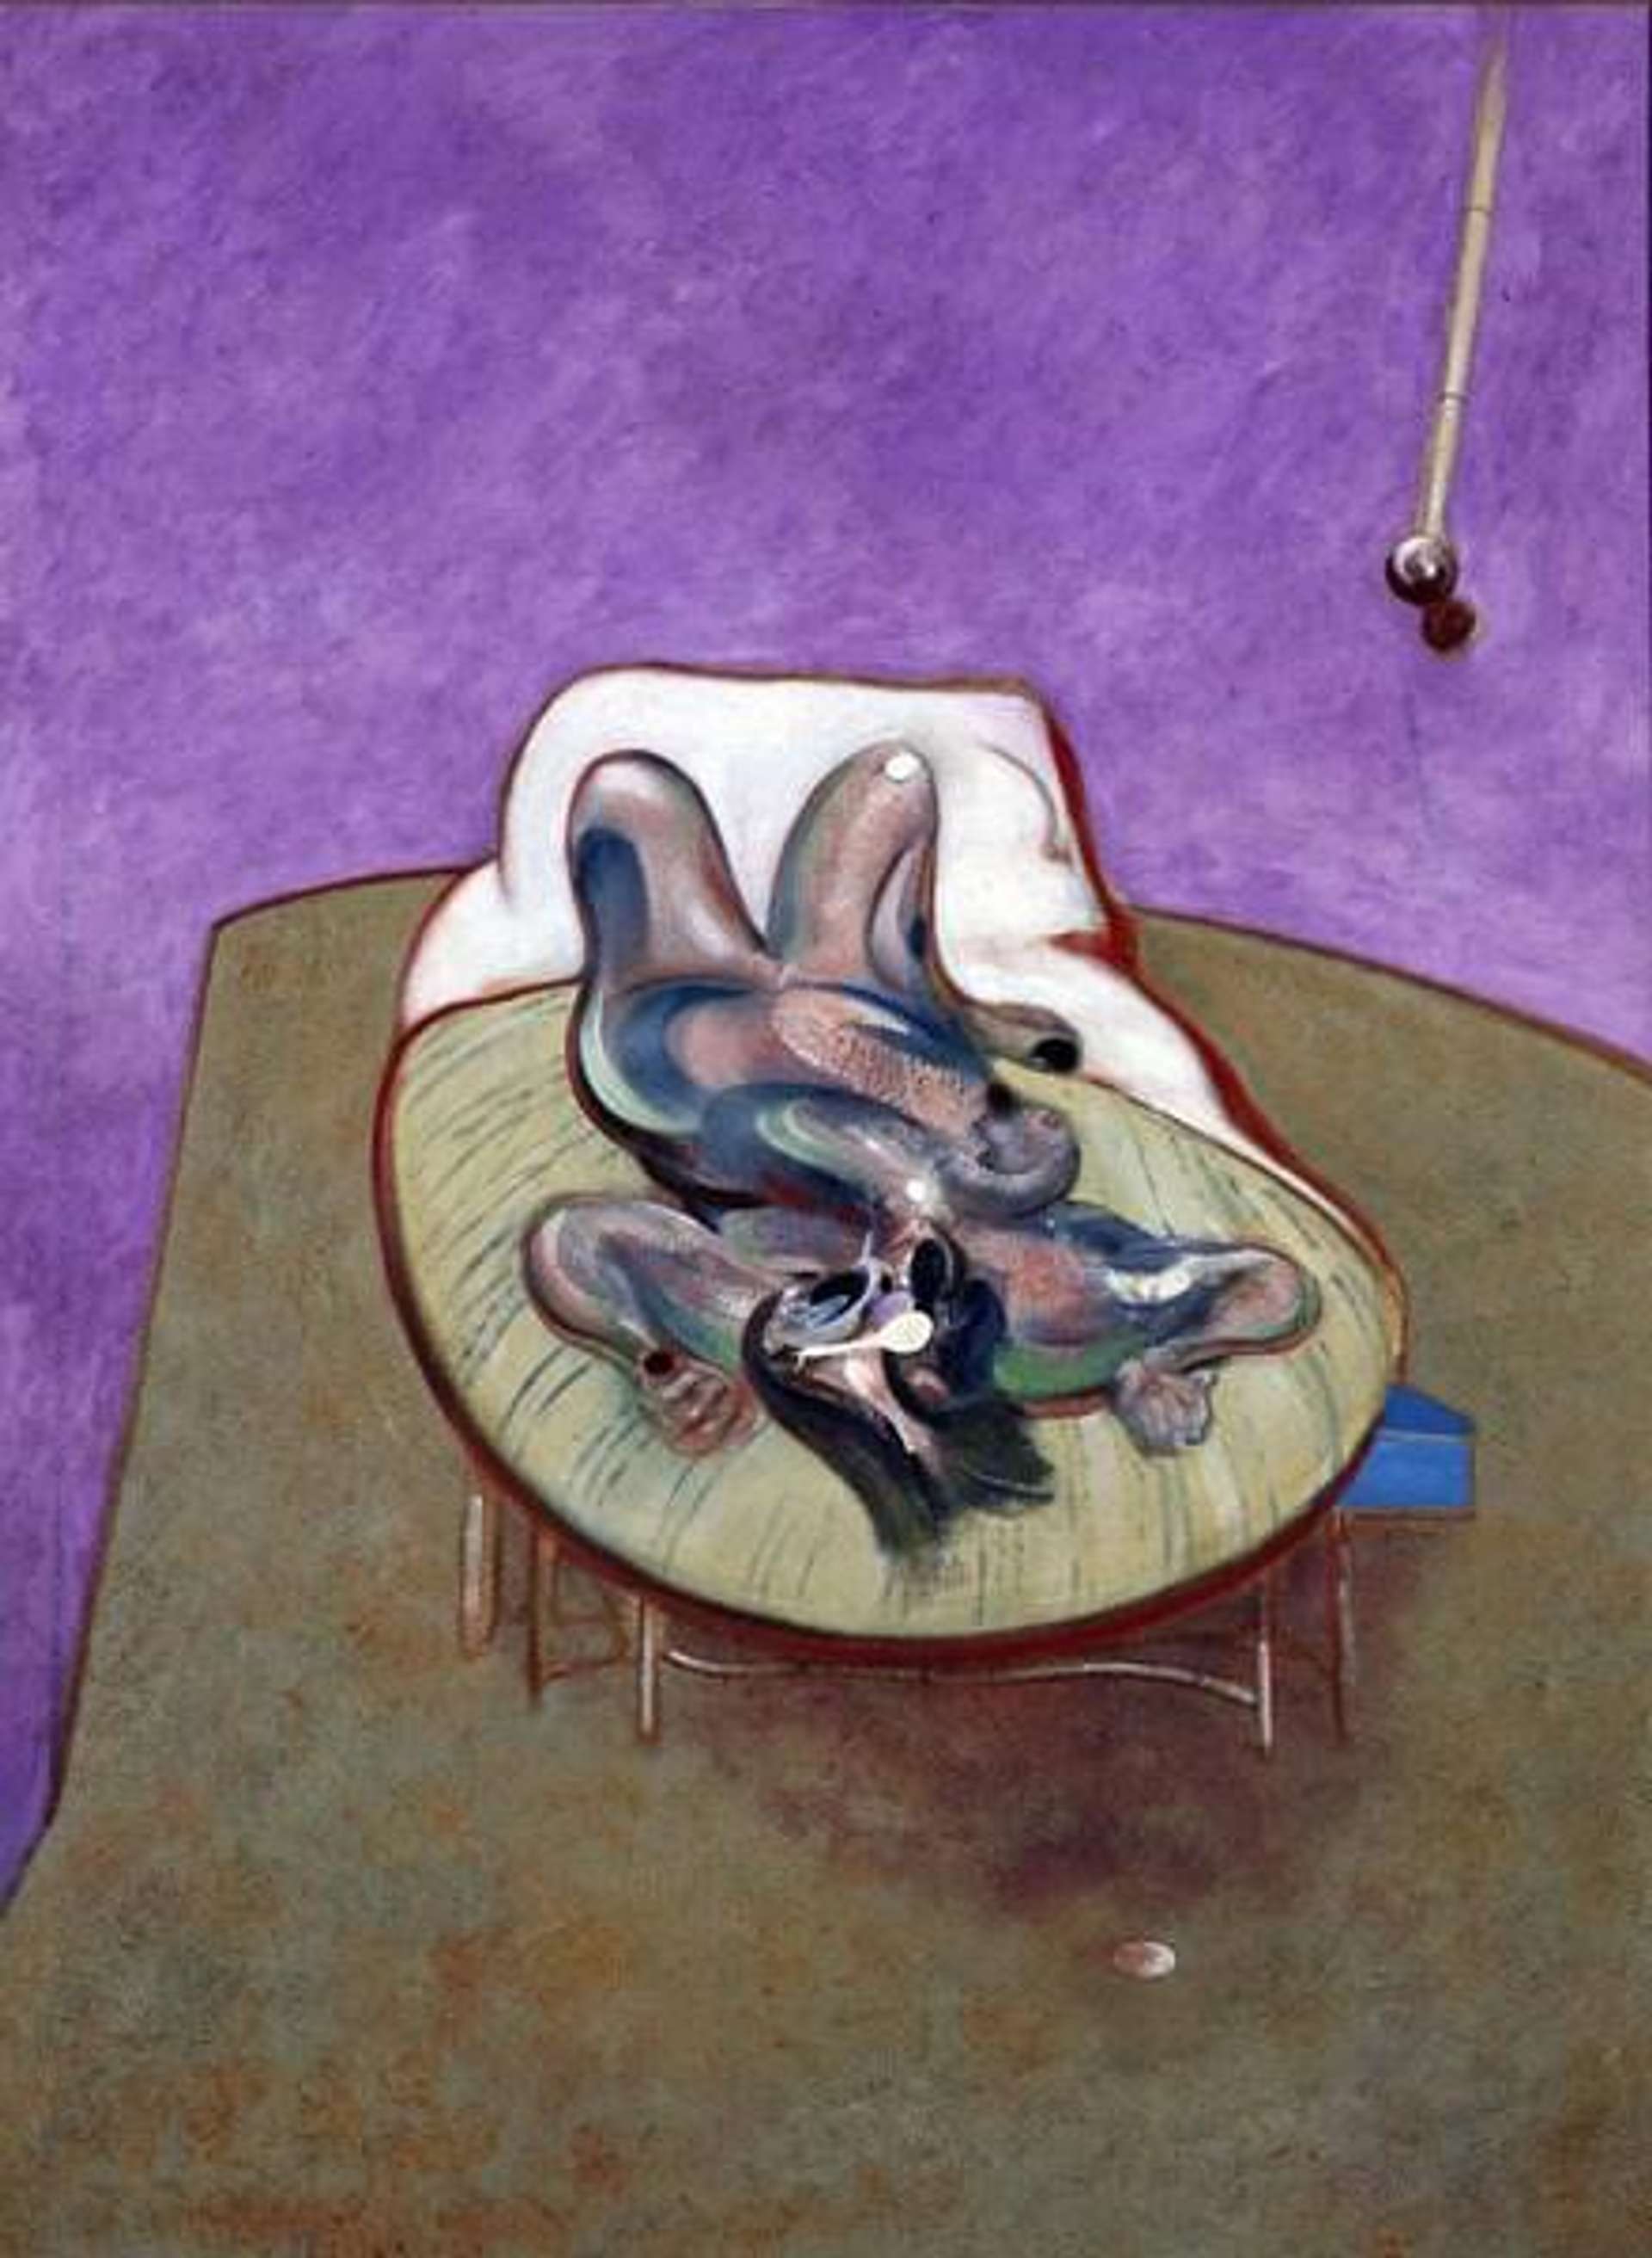 A nude figure lying on a bed in the centre of the panel with legs and arms up surrounded by purple walls